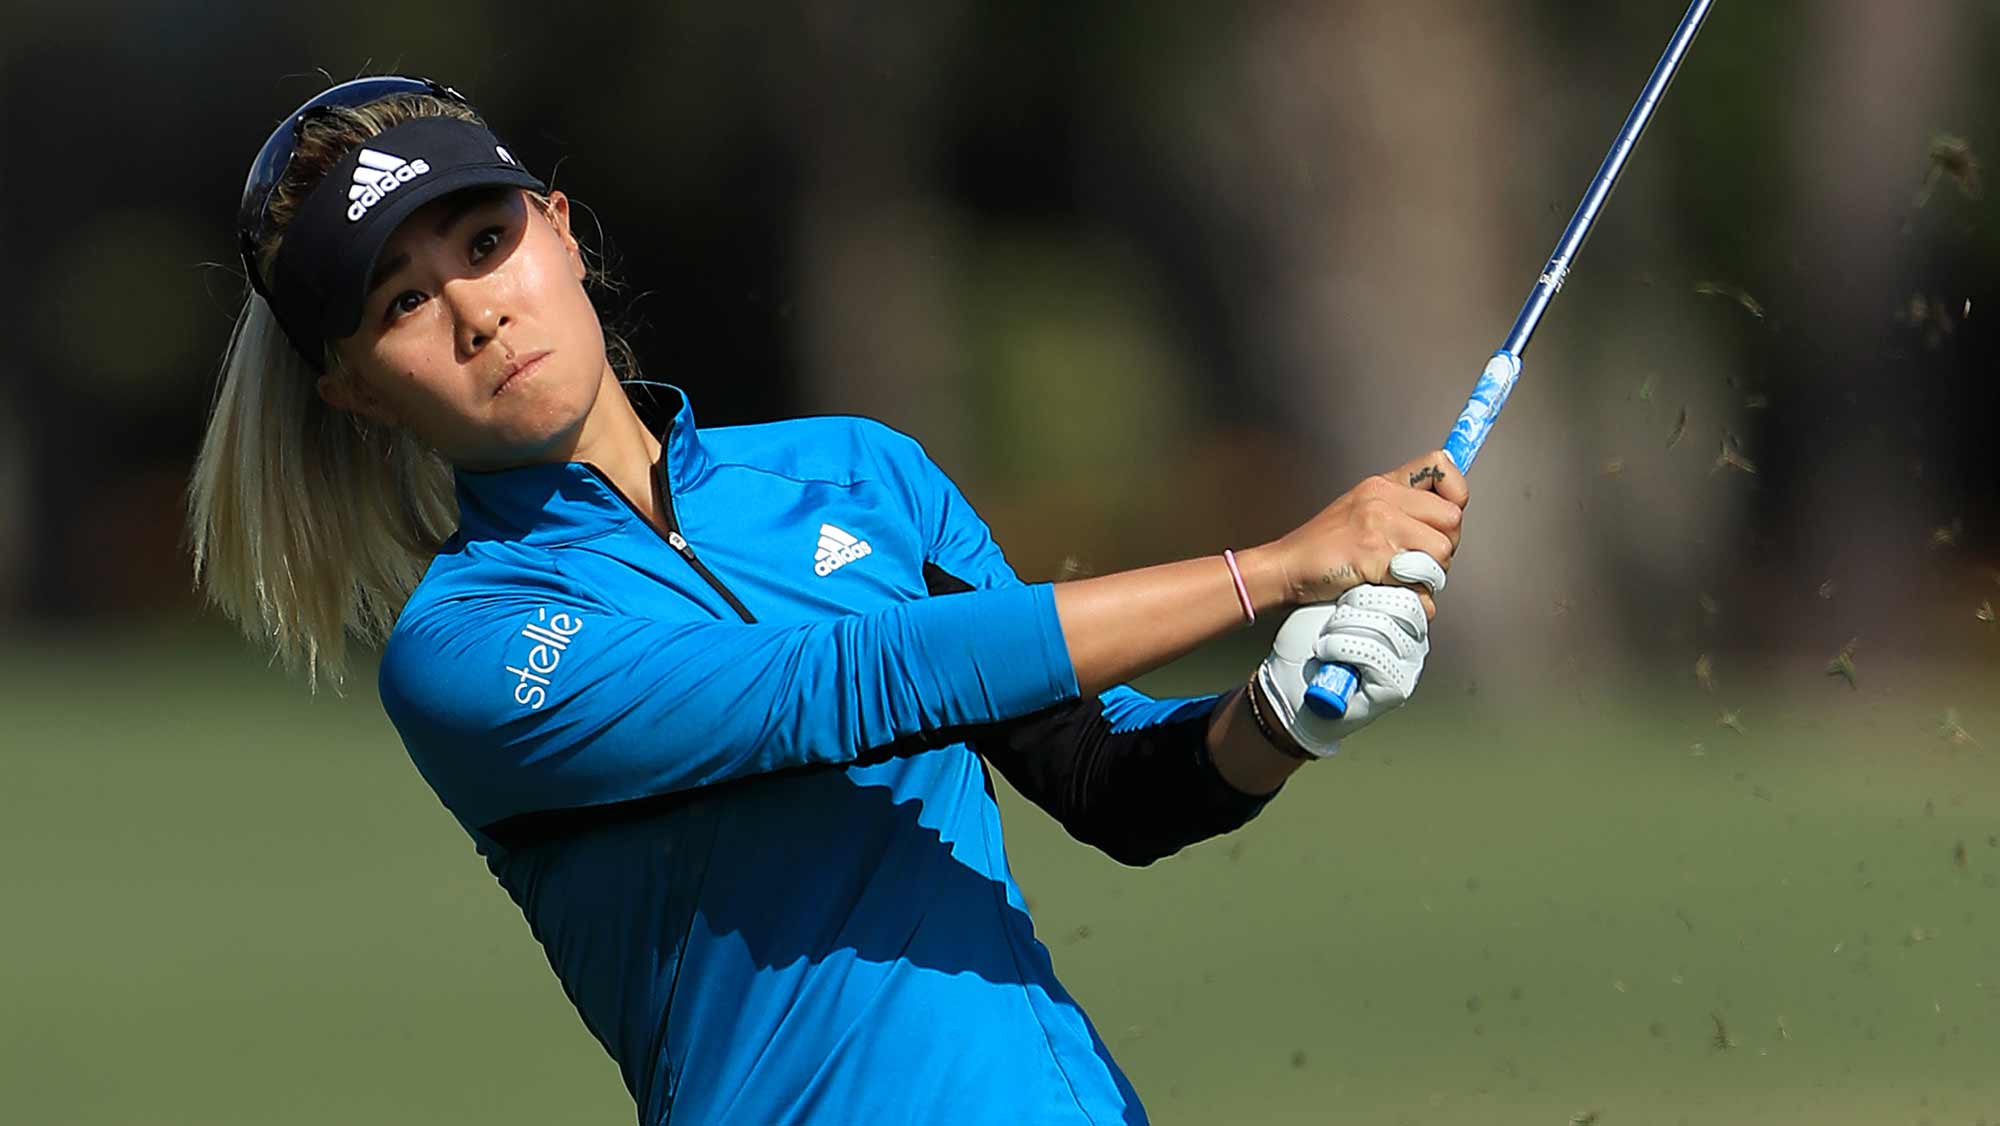 Danielle Kang of the United States plays a shot on the sixth hole during the final round of the CME Group Tour Championship at Tiburon Golf Club on November 24, 2019 in Naples, Florida